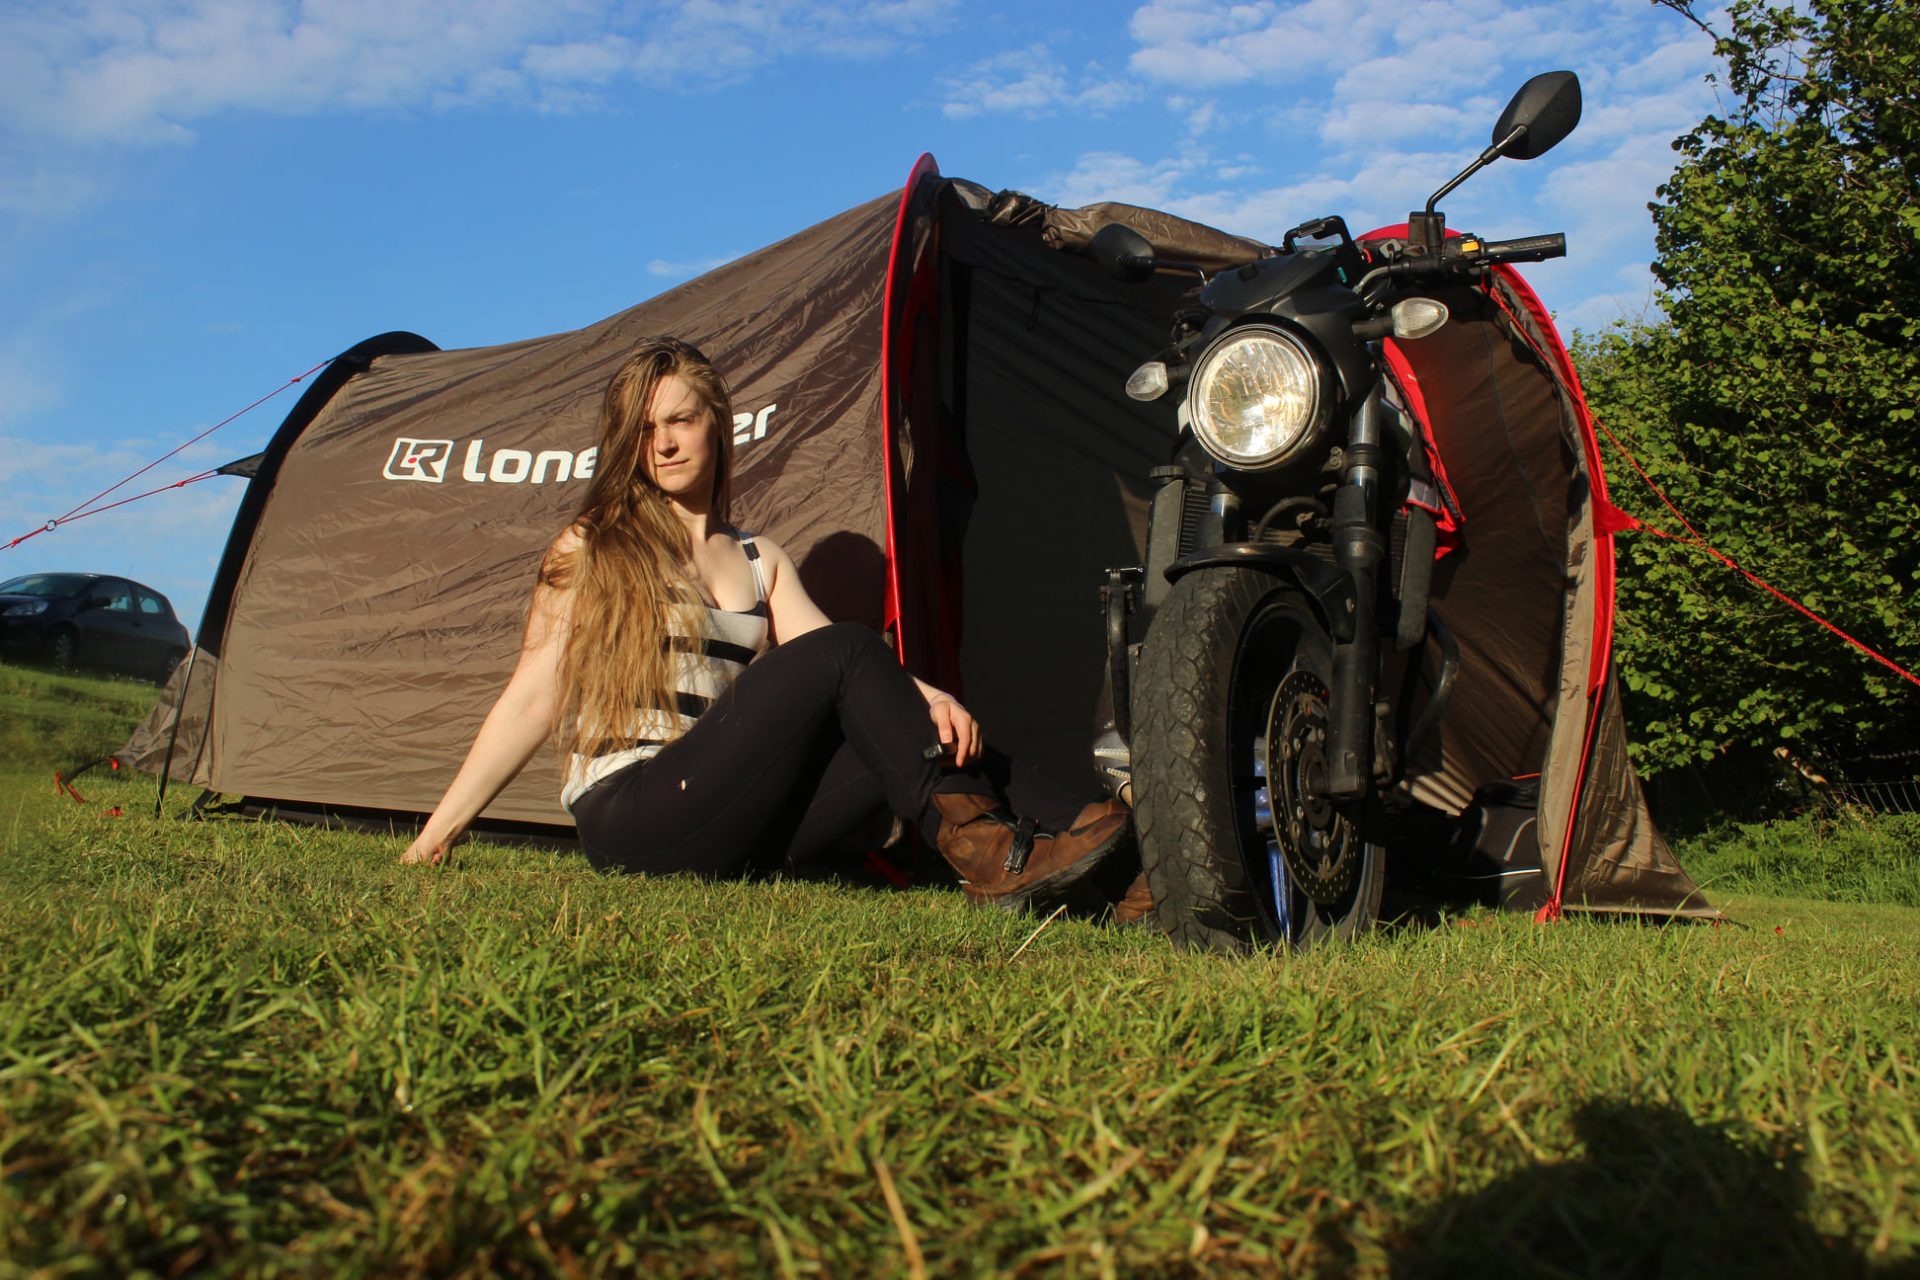 Best tent for motorcycle camping